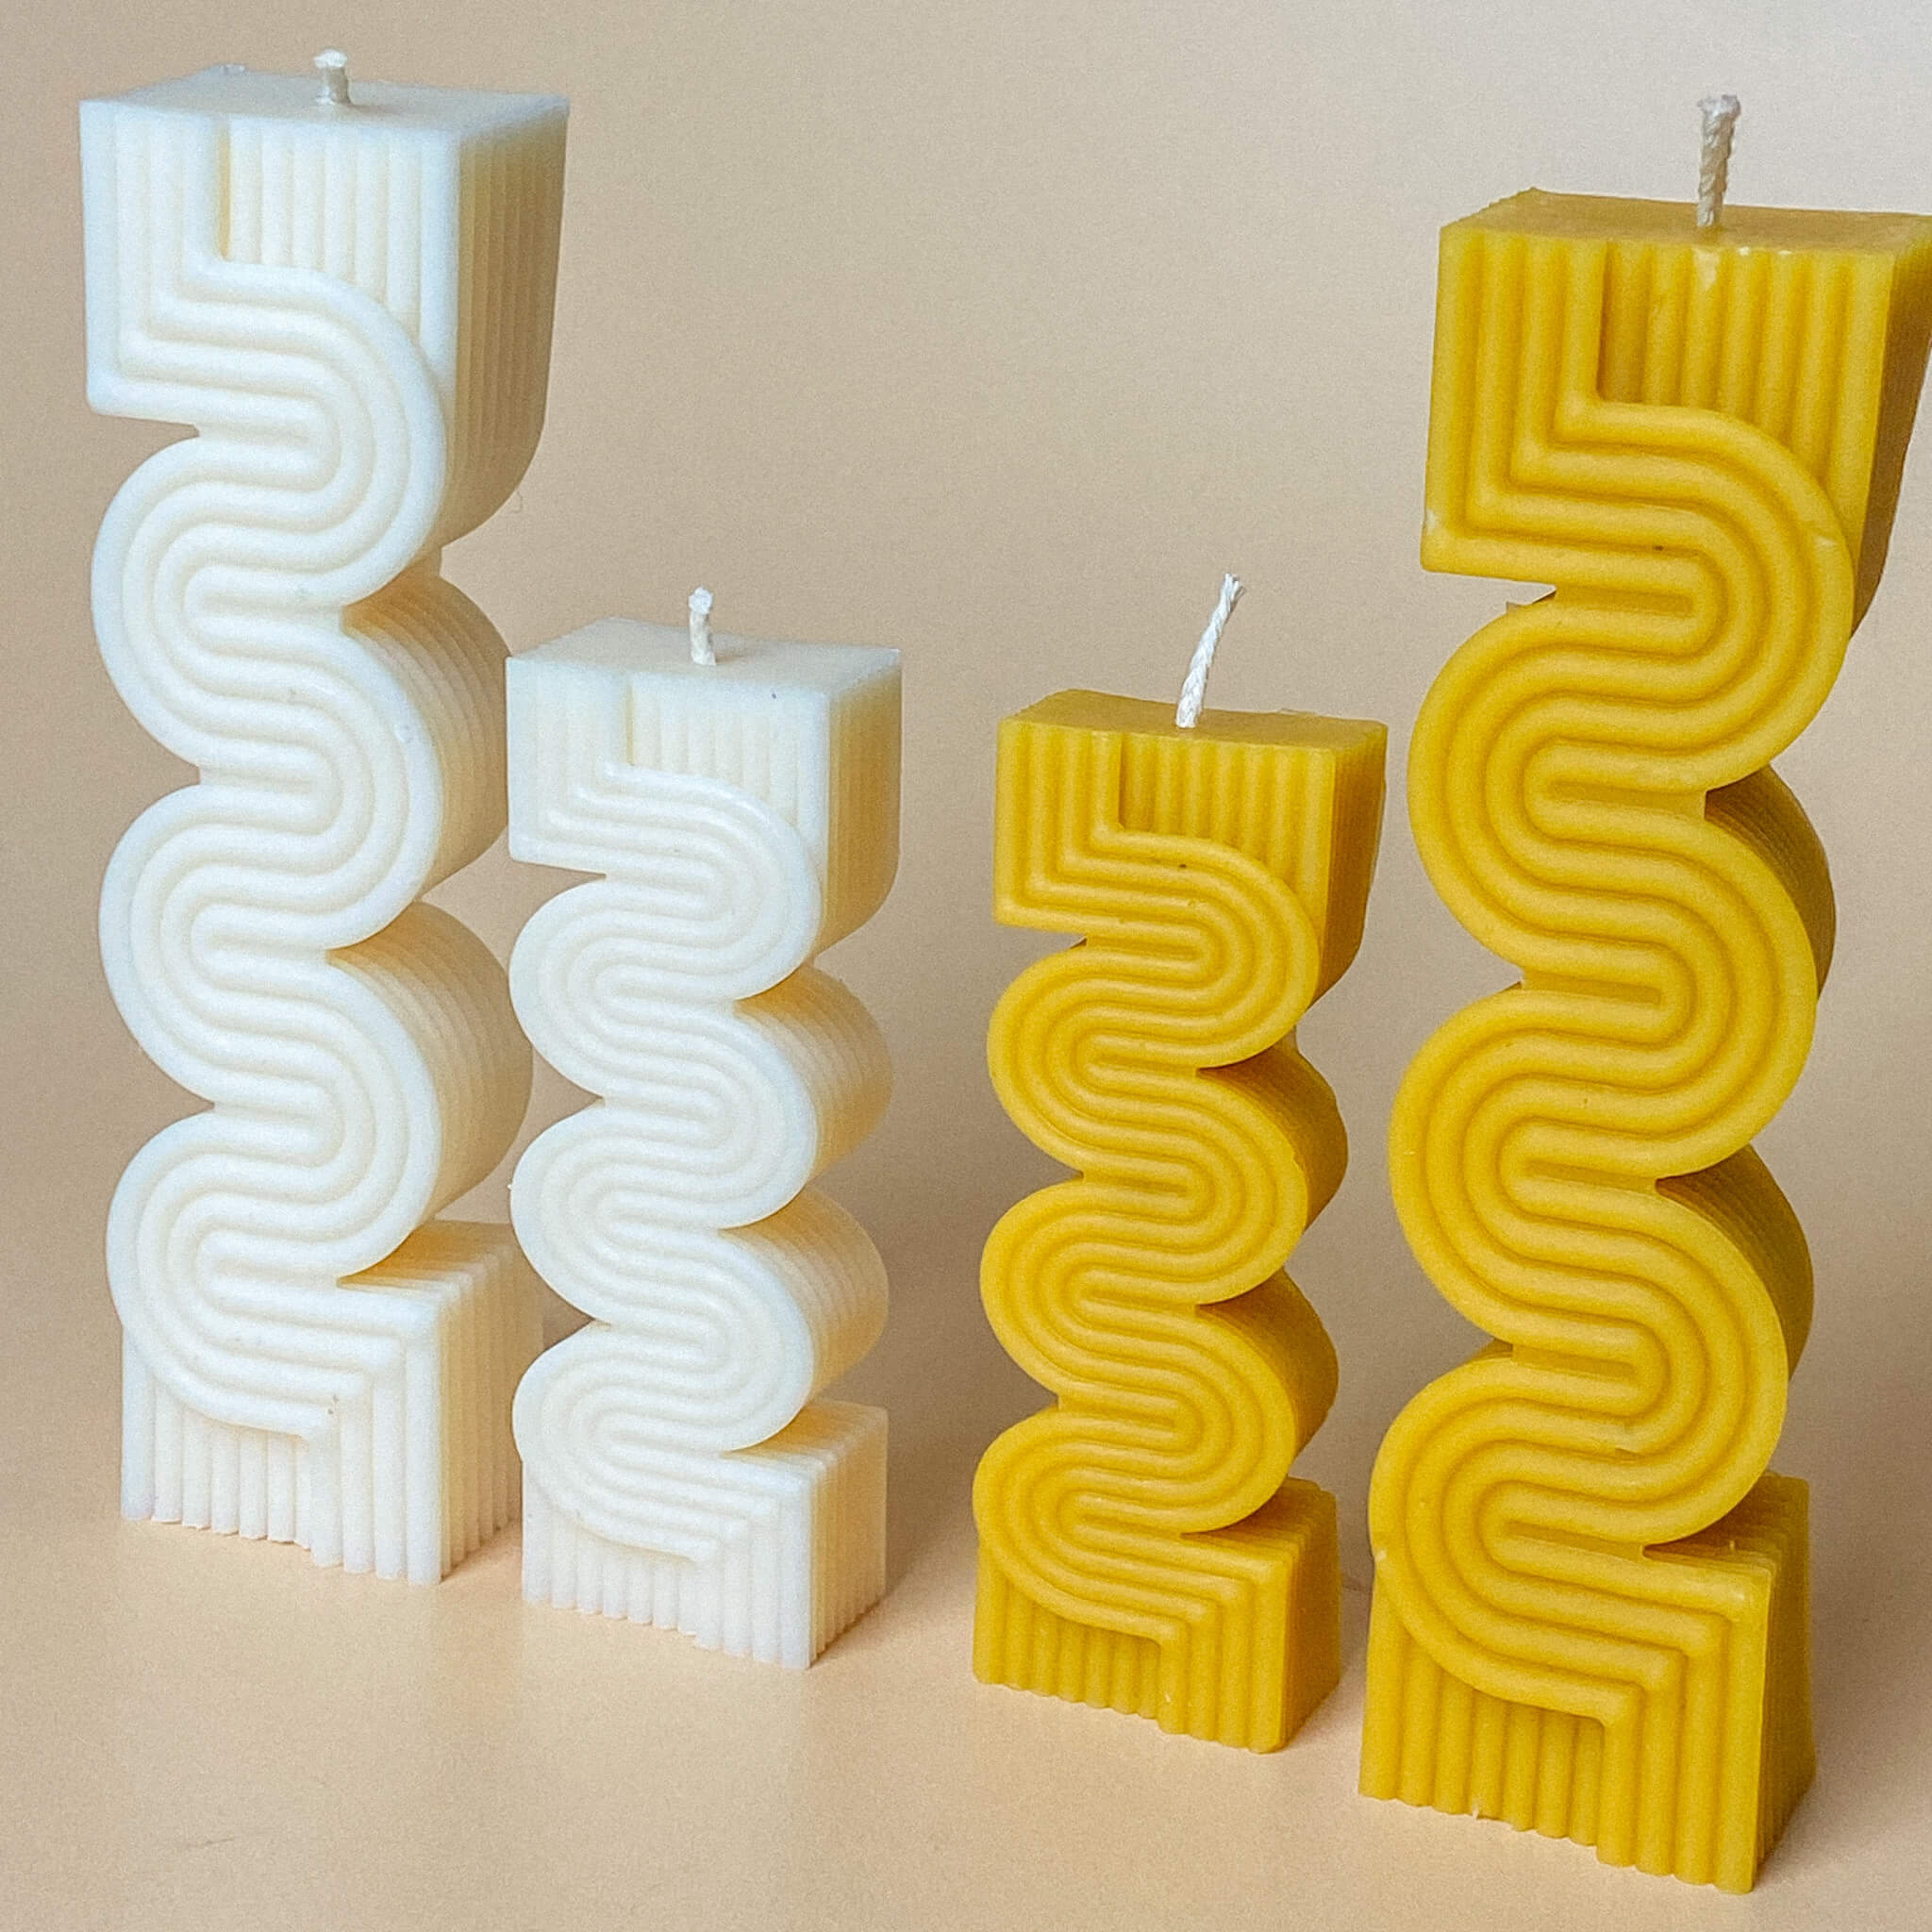 Beeswax for Candle Making - All Australian Candle Making Supplies